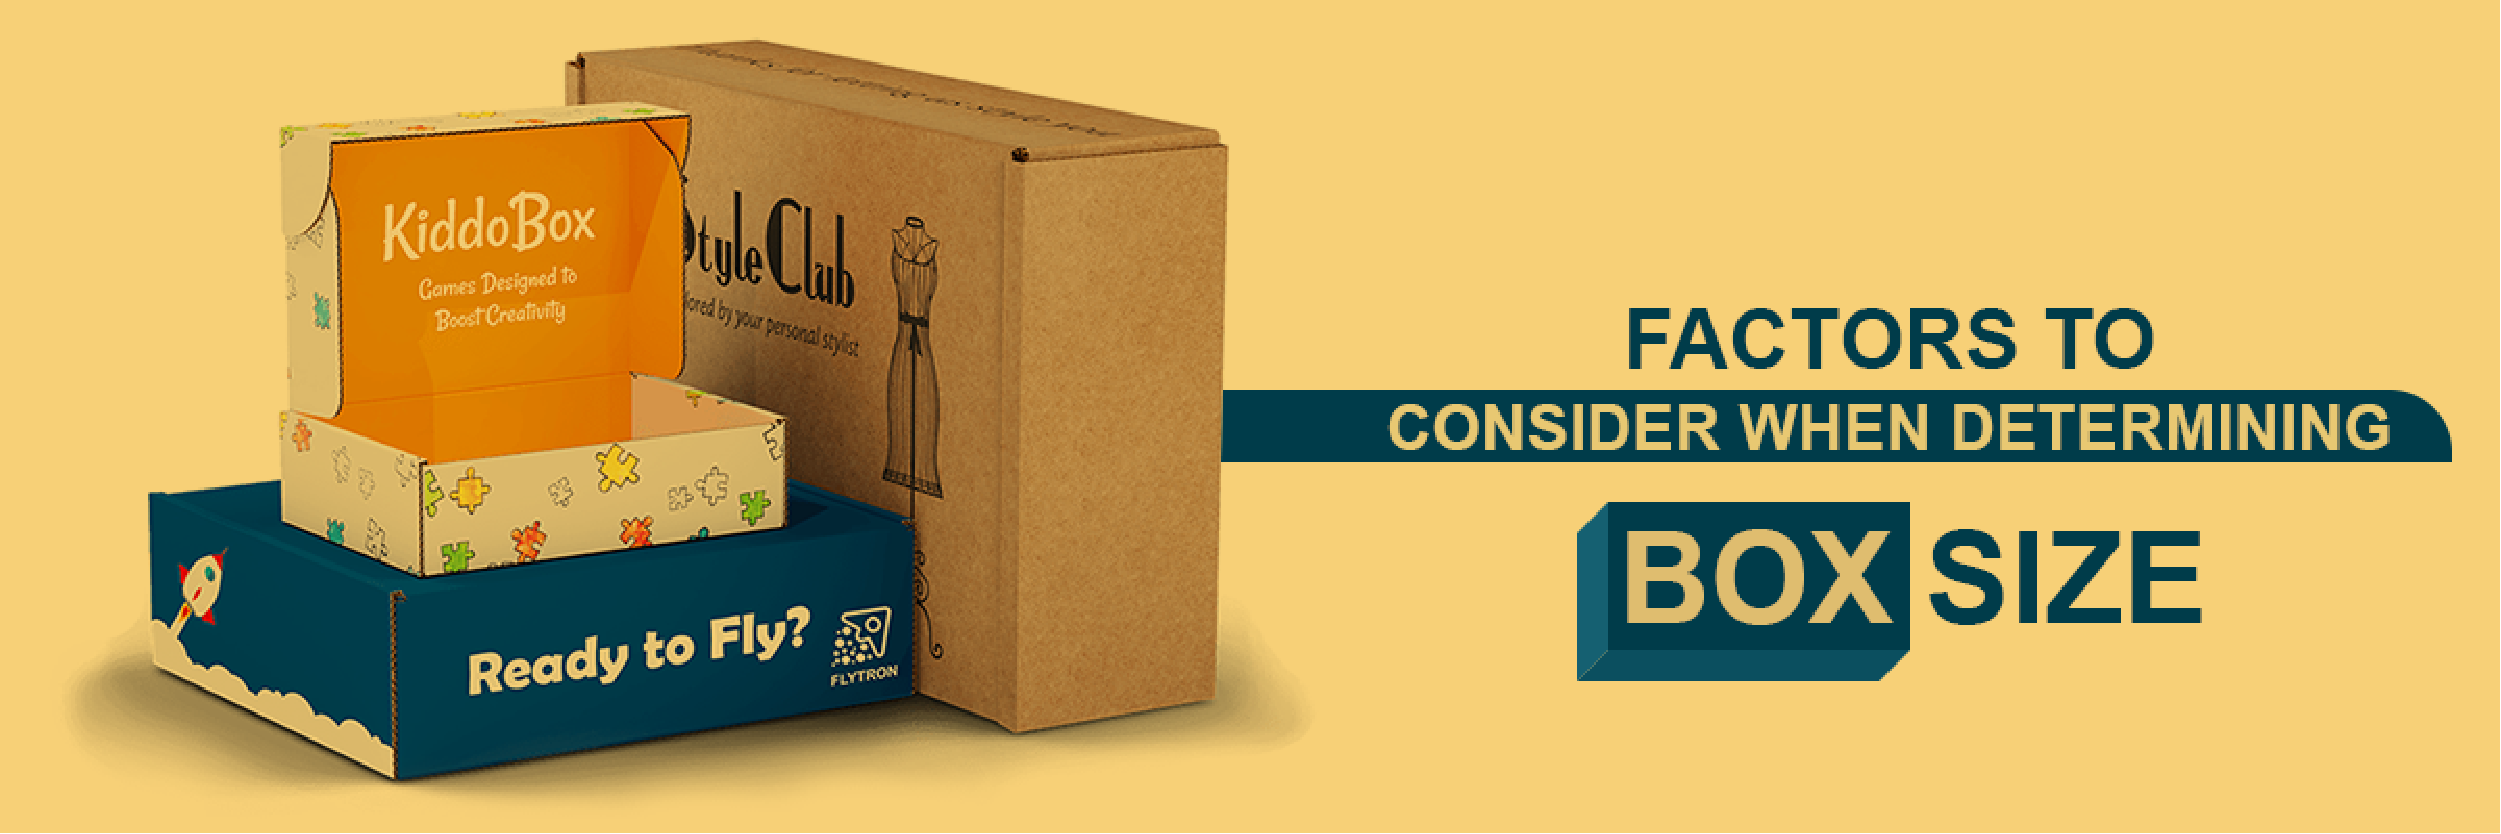 Factors to Consider When Determining Box Size